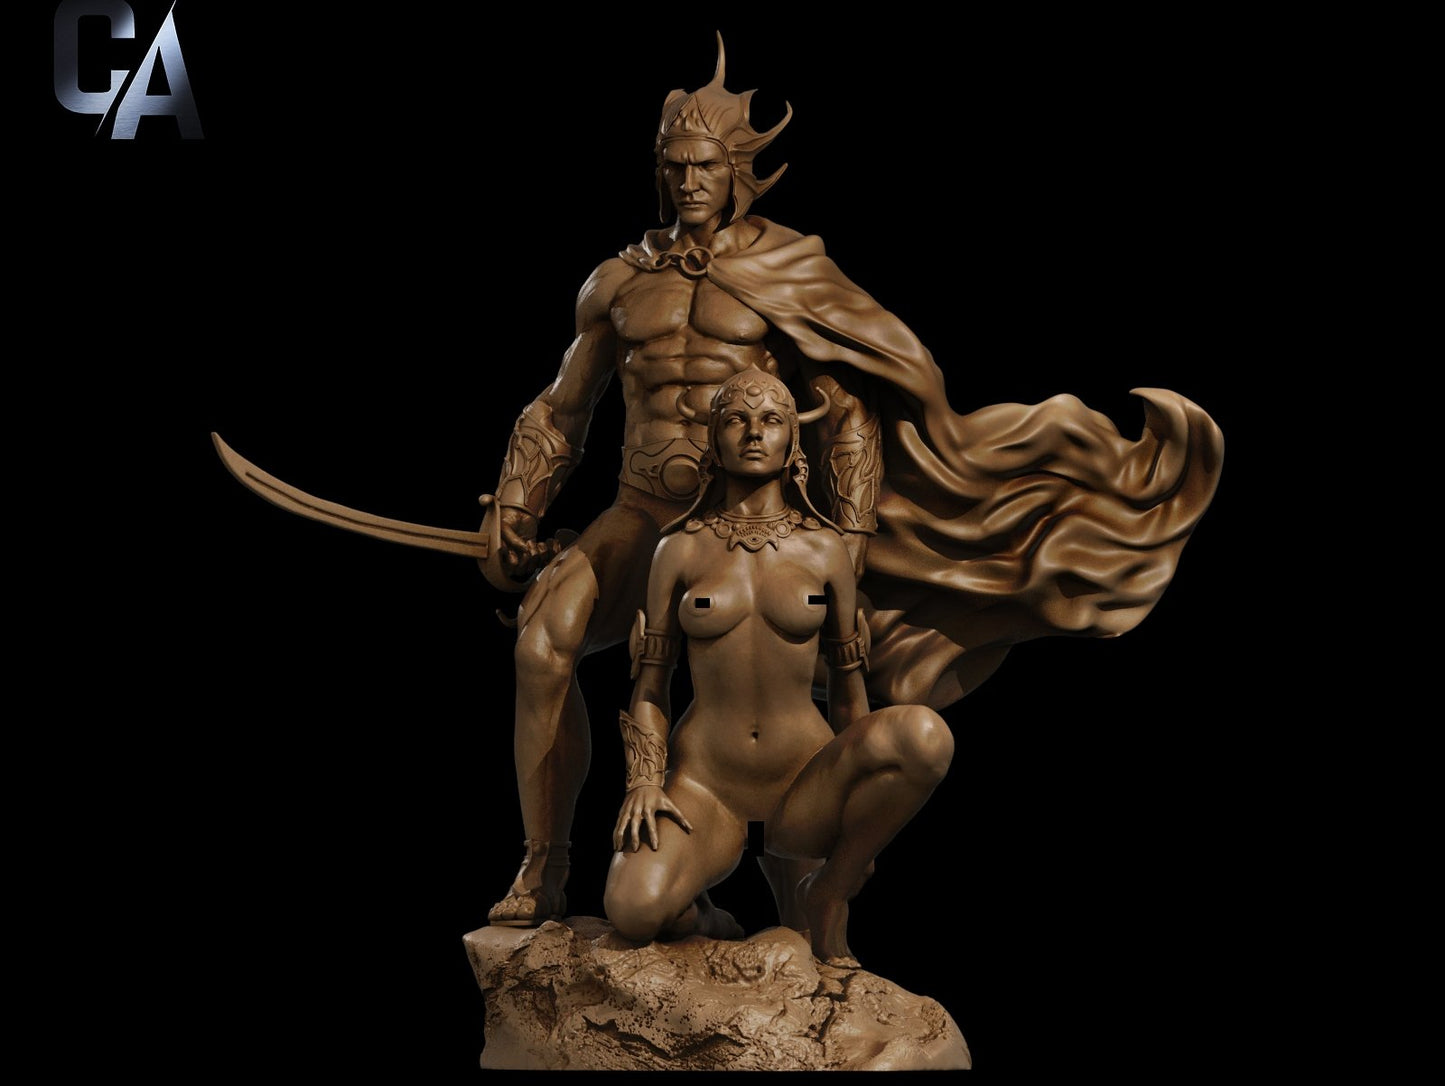 Fighting Couple of Mars 3D Printed NSFW Figurine FunArt by ca_3d_art